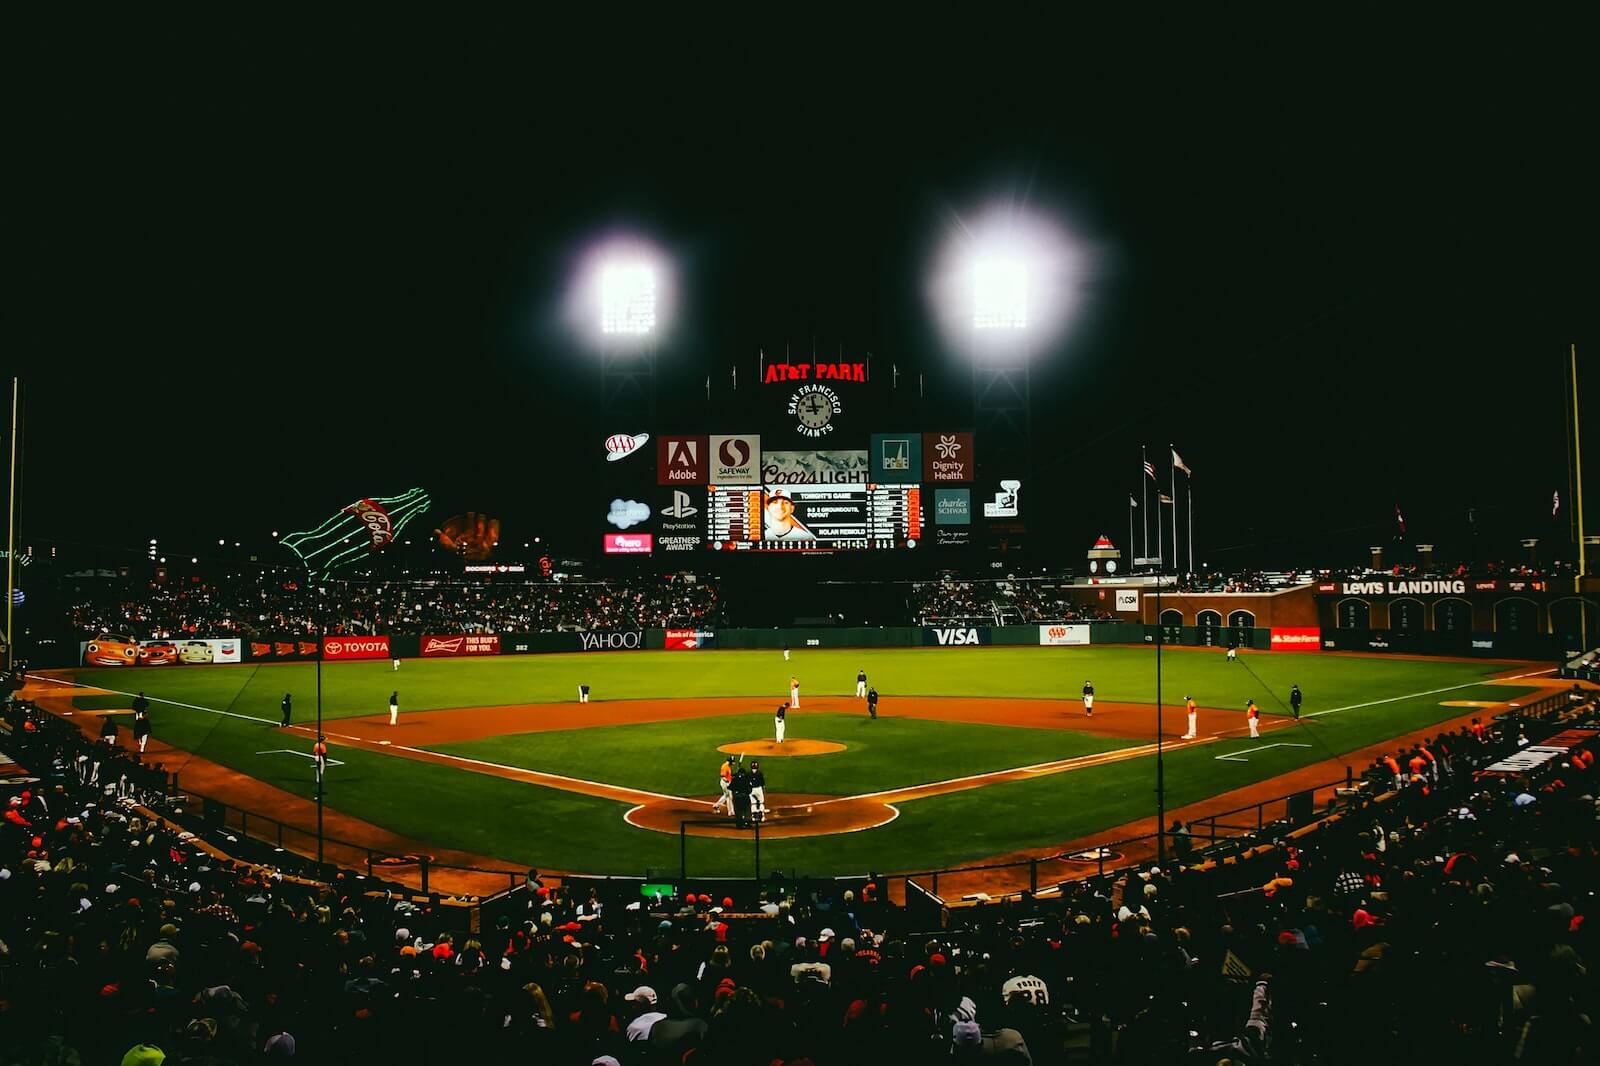 view from stands of behind home plate of baseball stadium with lights on